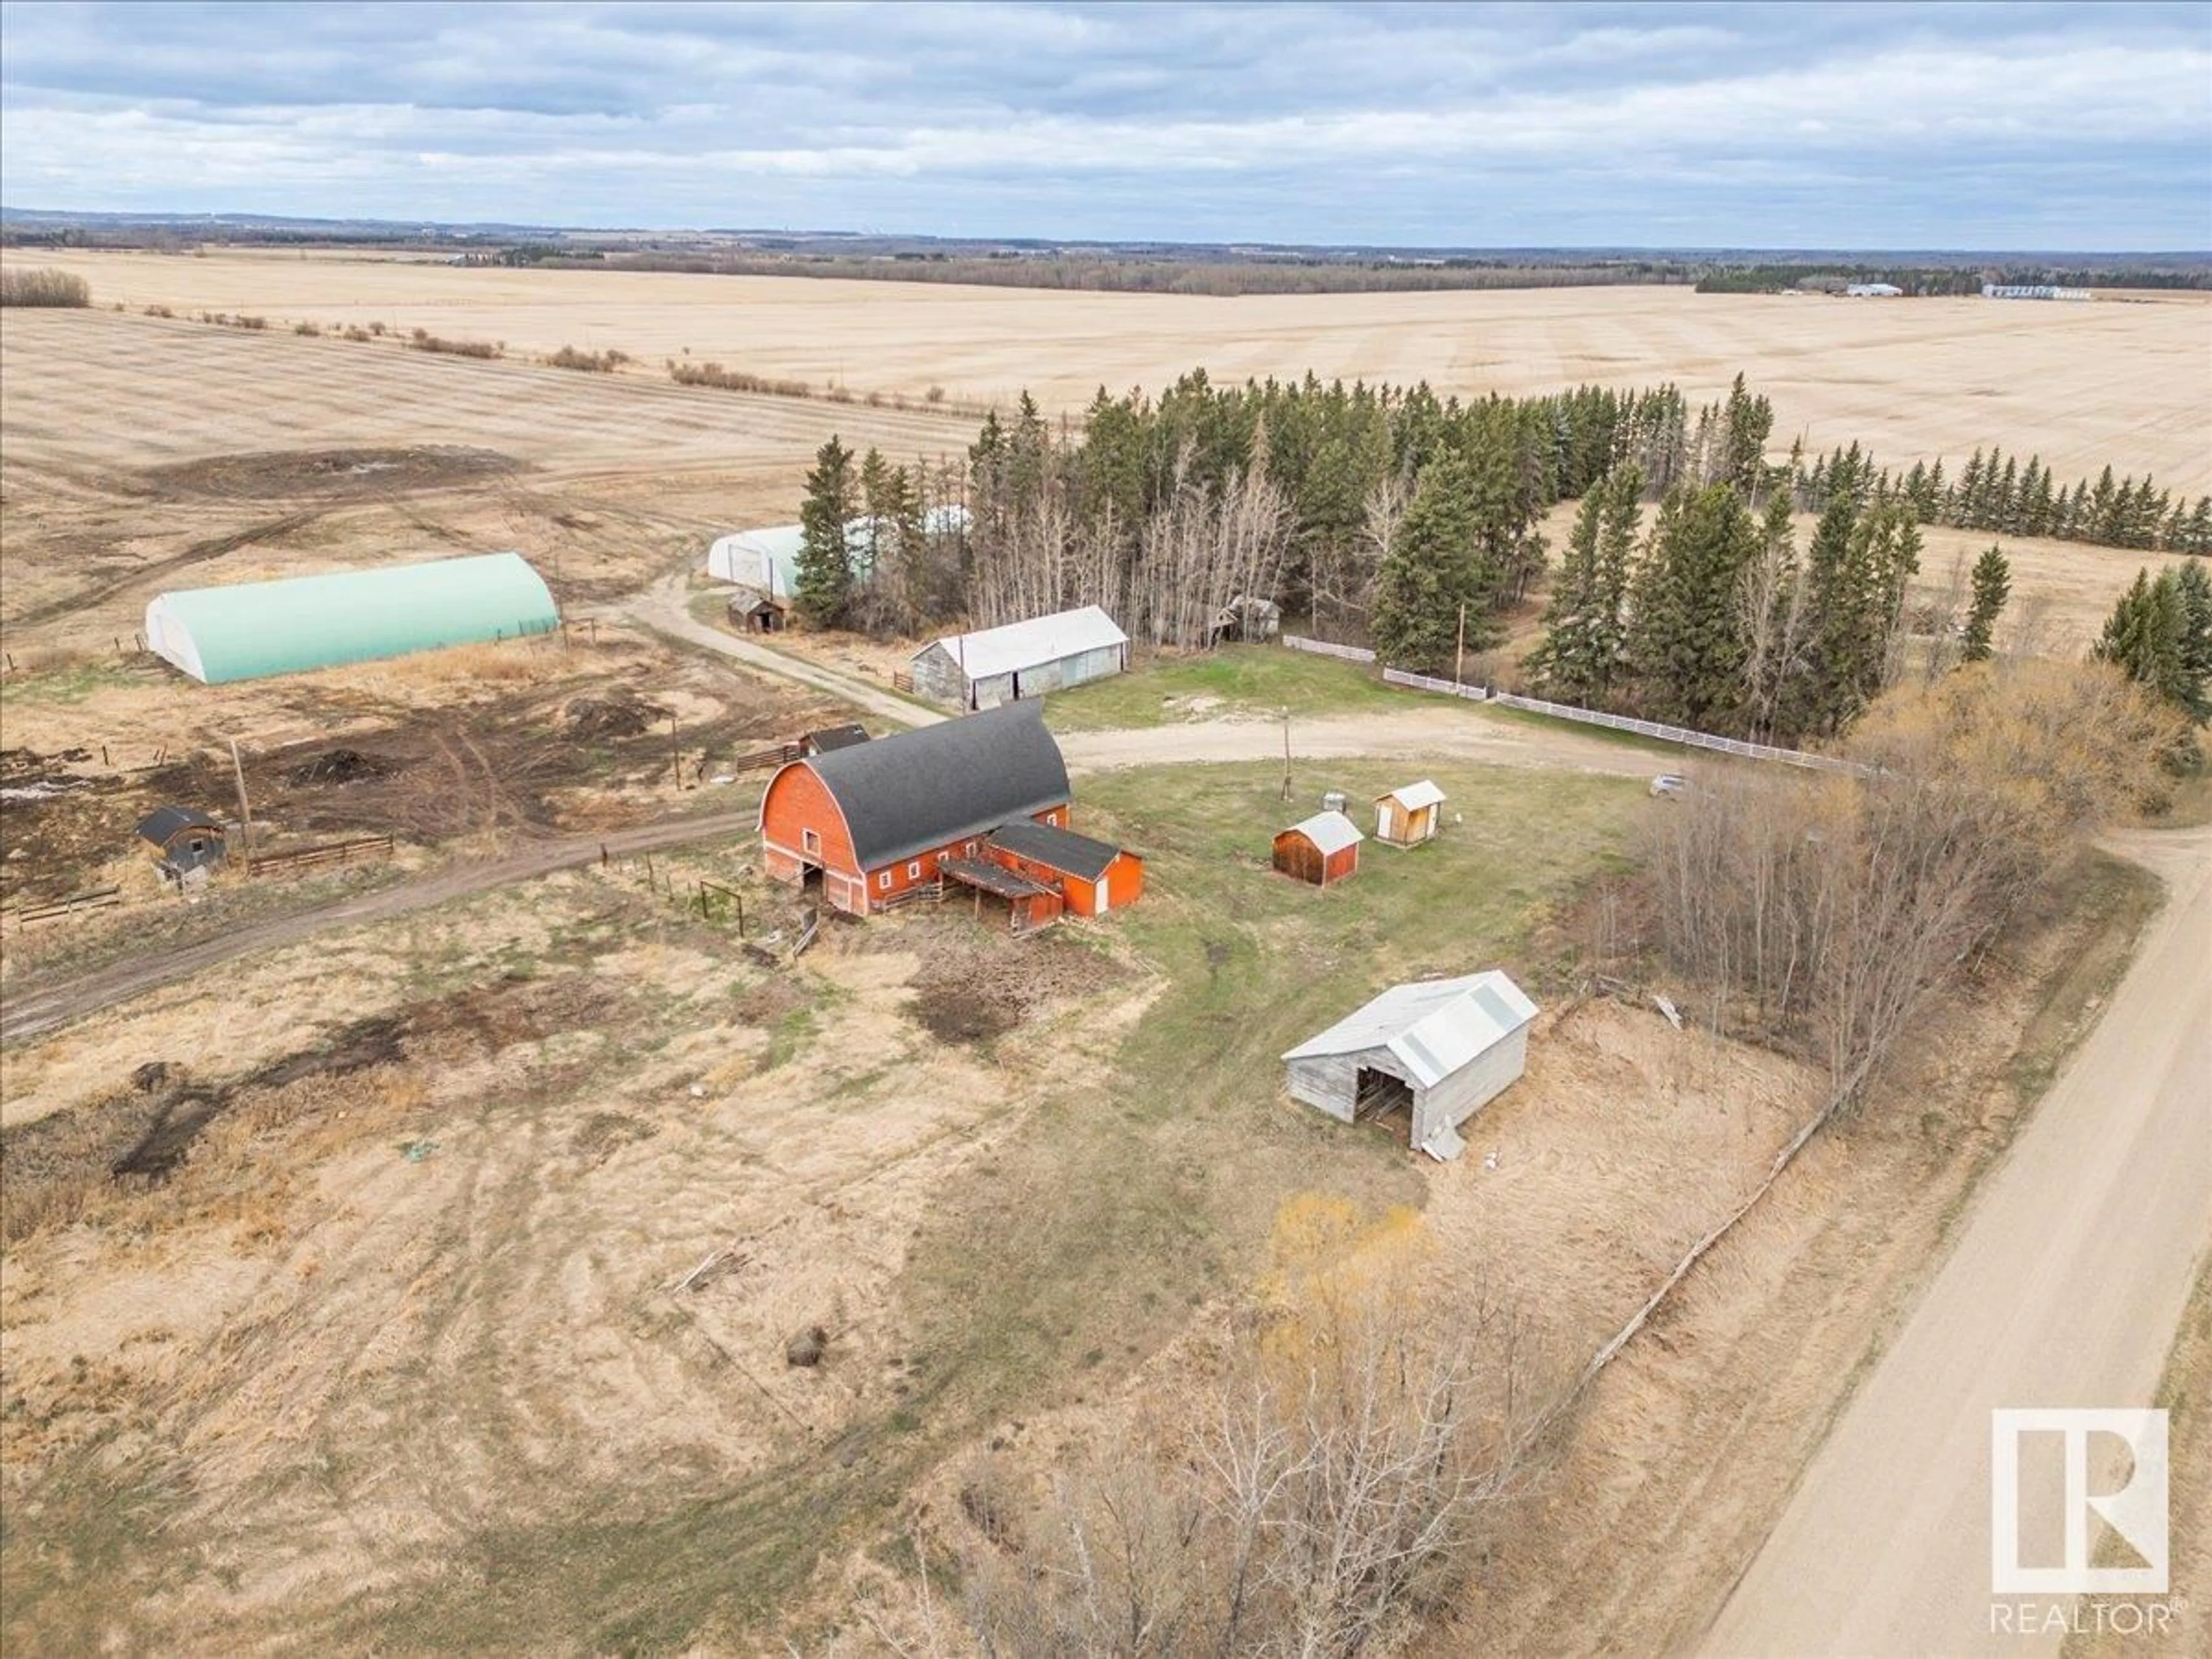 Shed for 49374 Rge Rd 14, Rural Leduc County Alberta T0C2P0